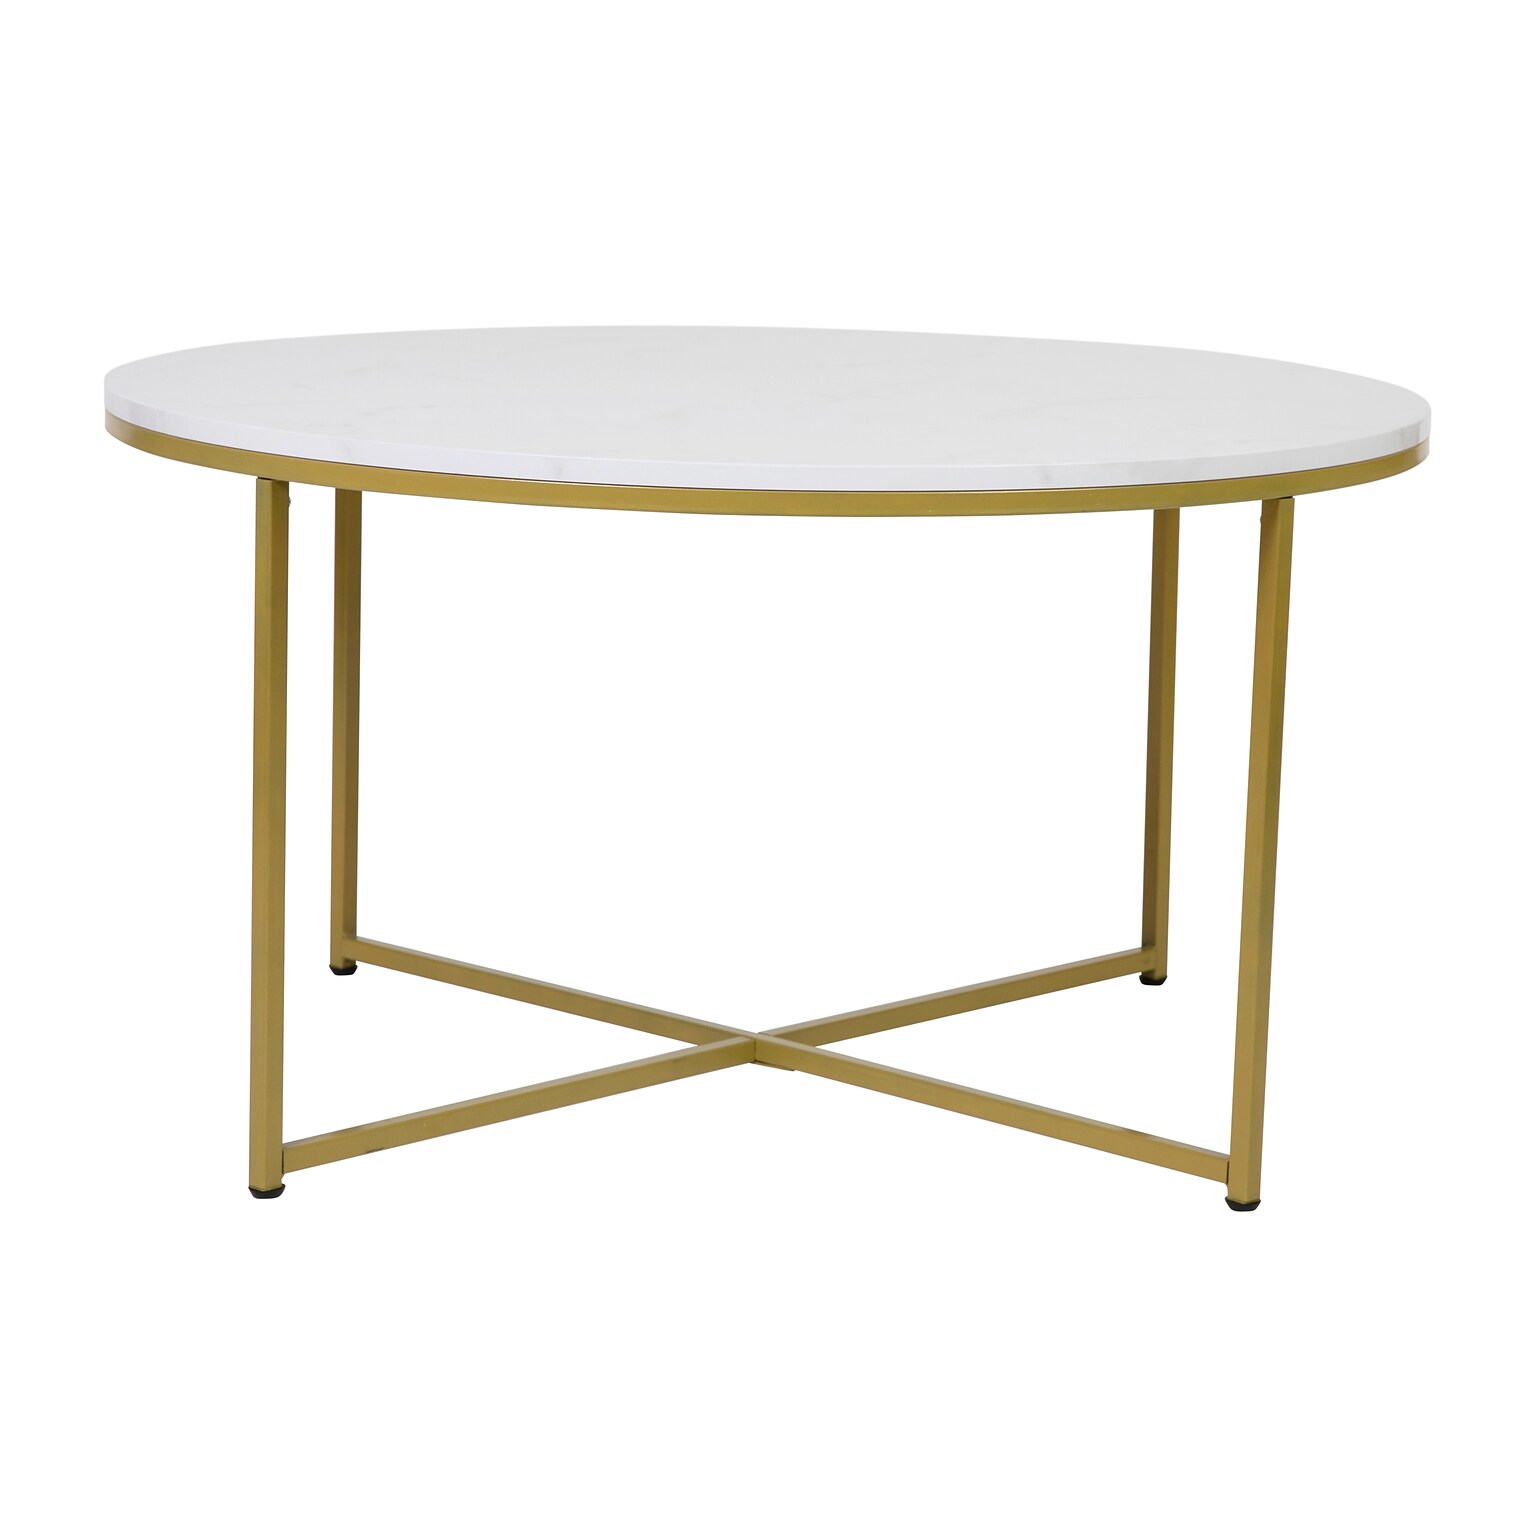 Flash Furniture Hampstead Collection 35.5 x 35.5 Living Room Coffee Table, White Marble/Brushed Gold (NANJH1787CTMR)